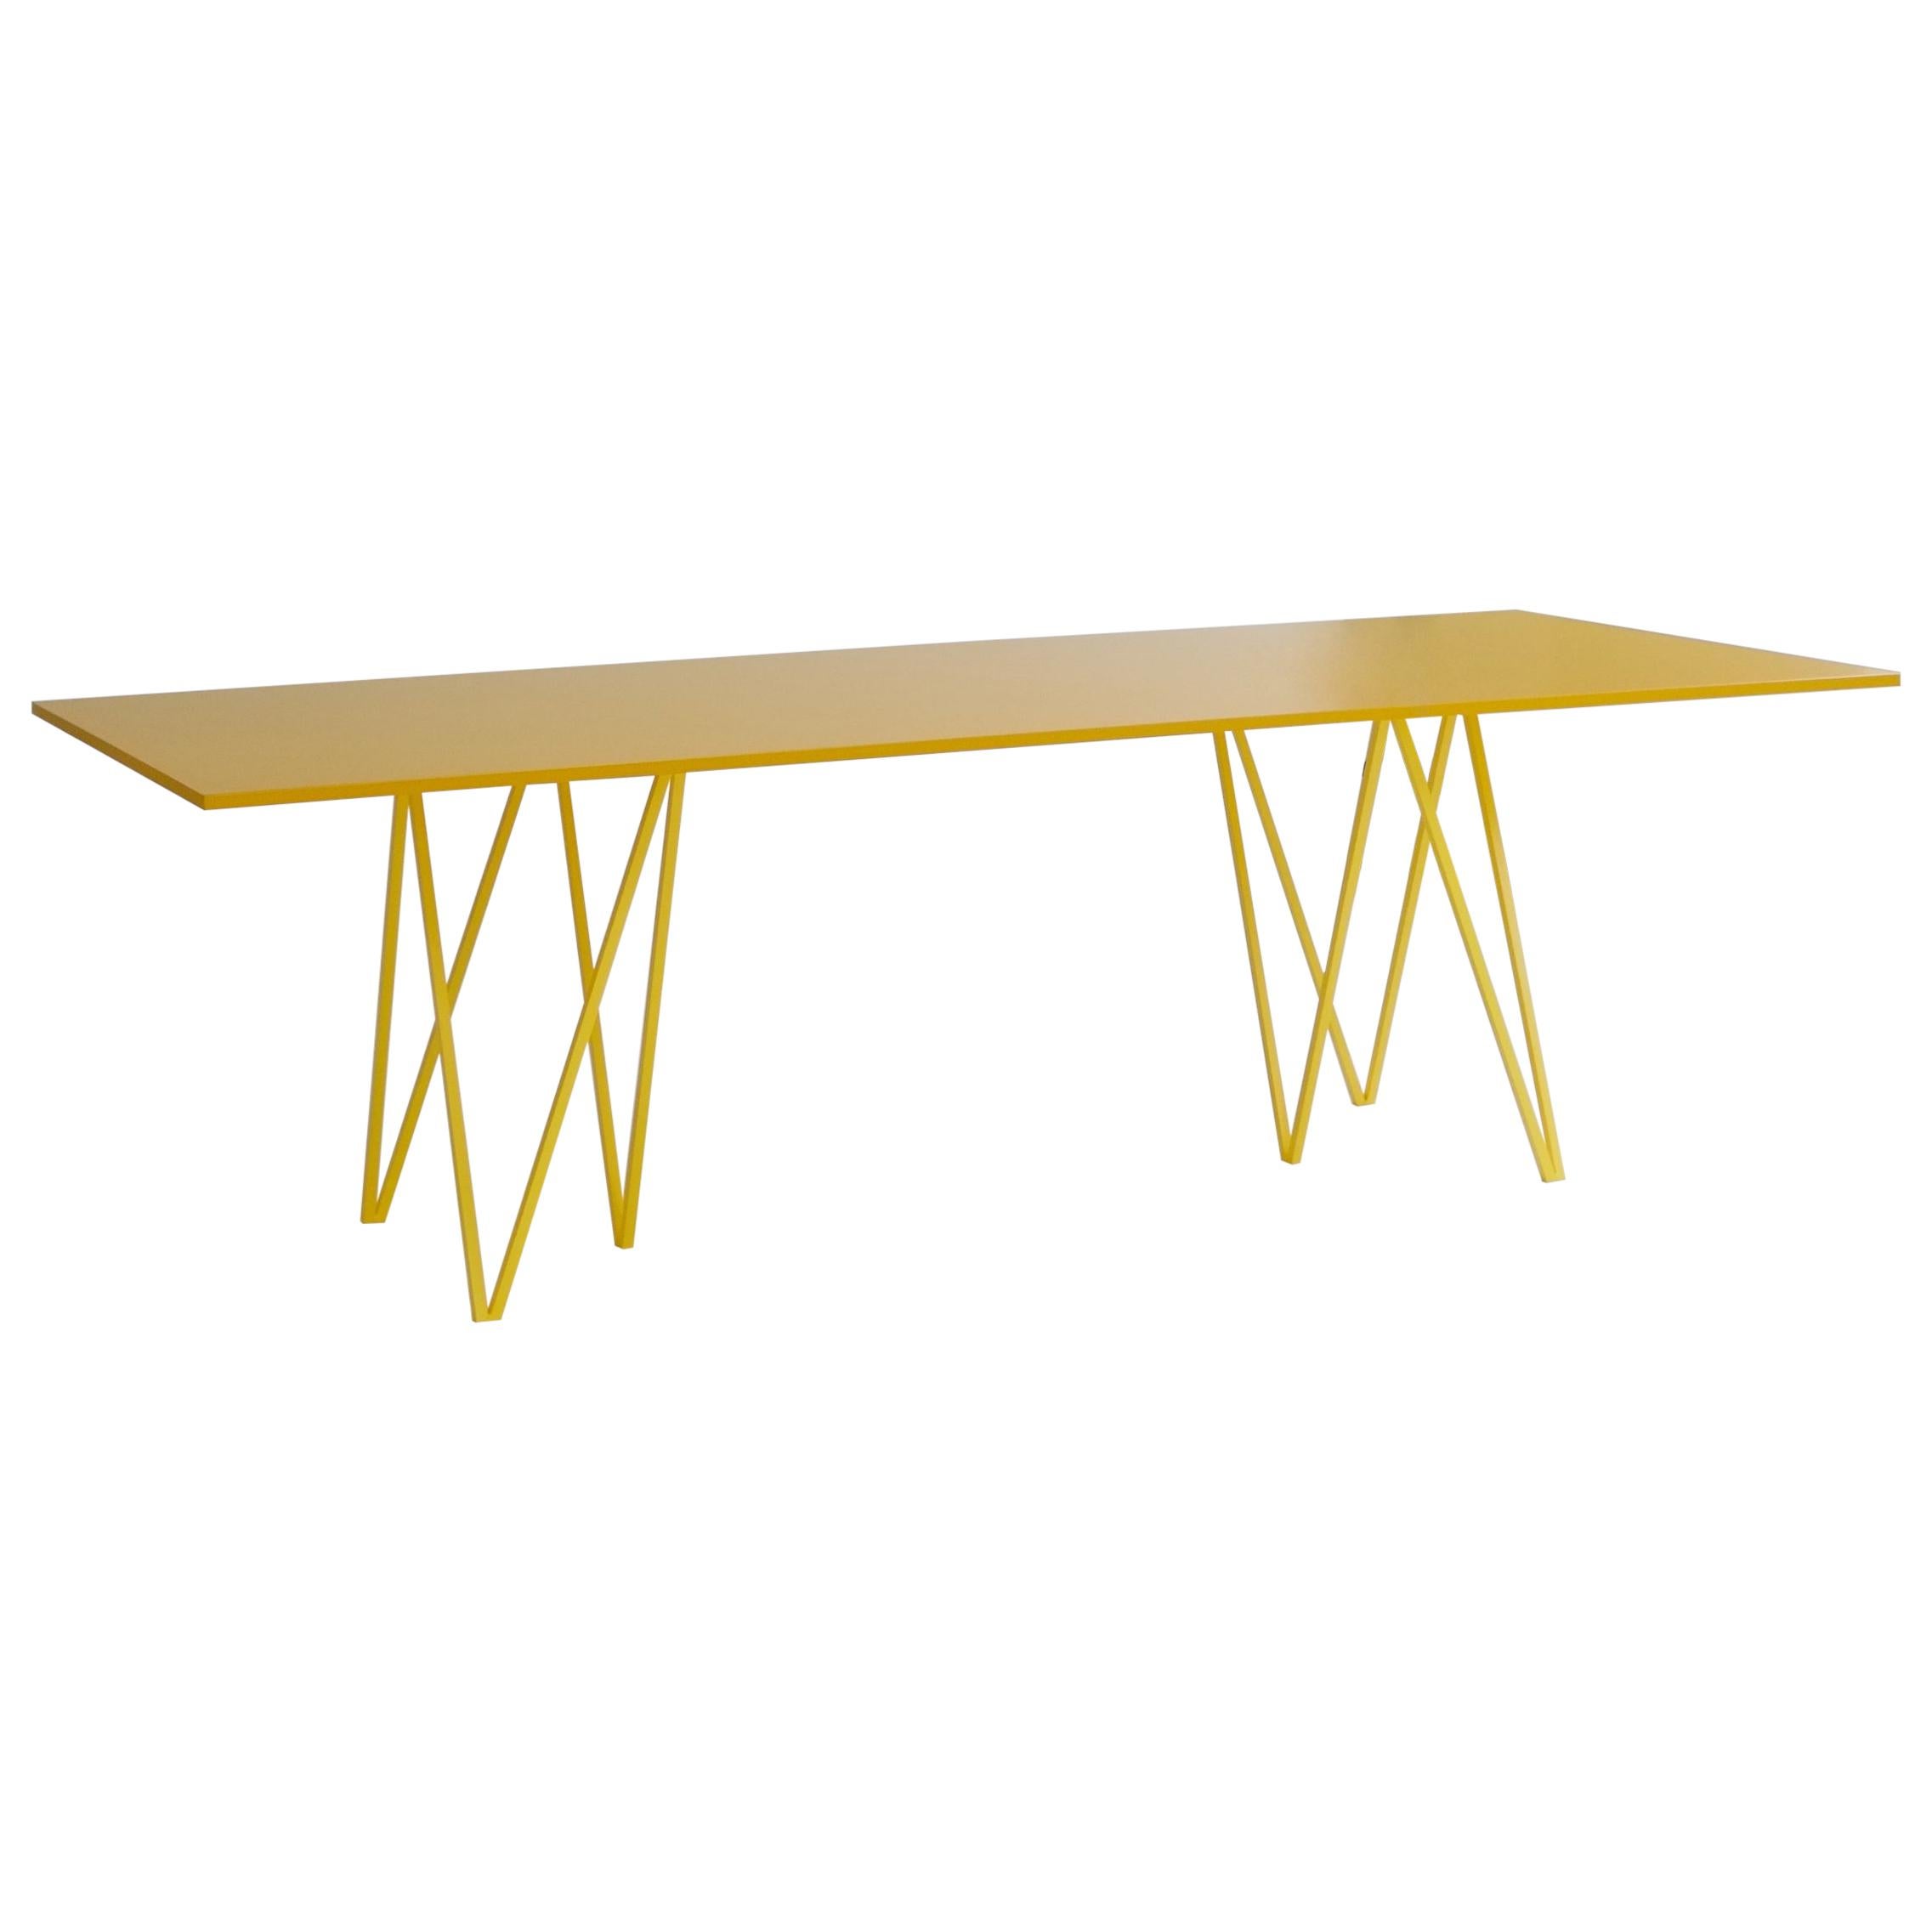 Large Architectural Yellow ZigZag Dining Table, Customisable For Sale